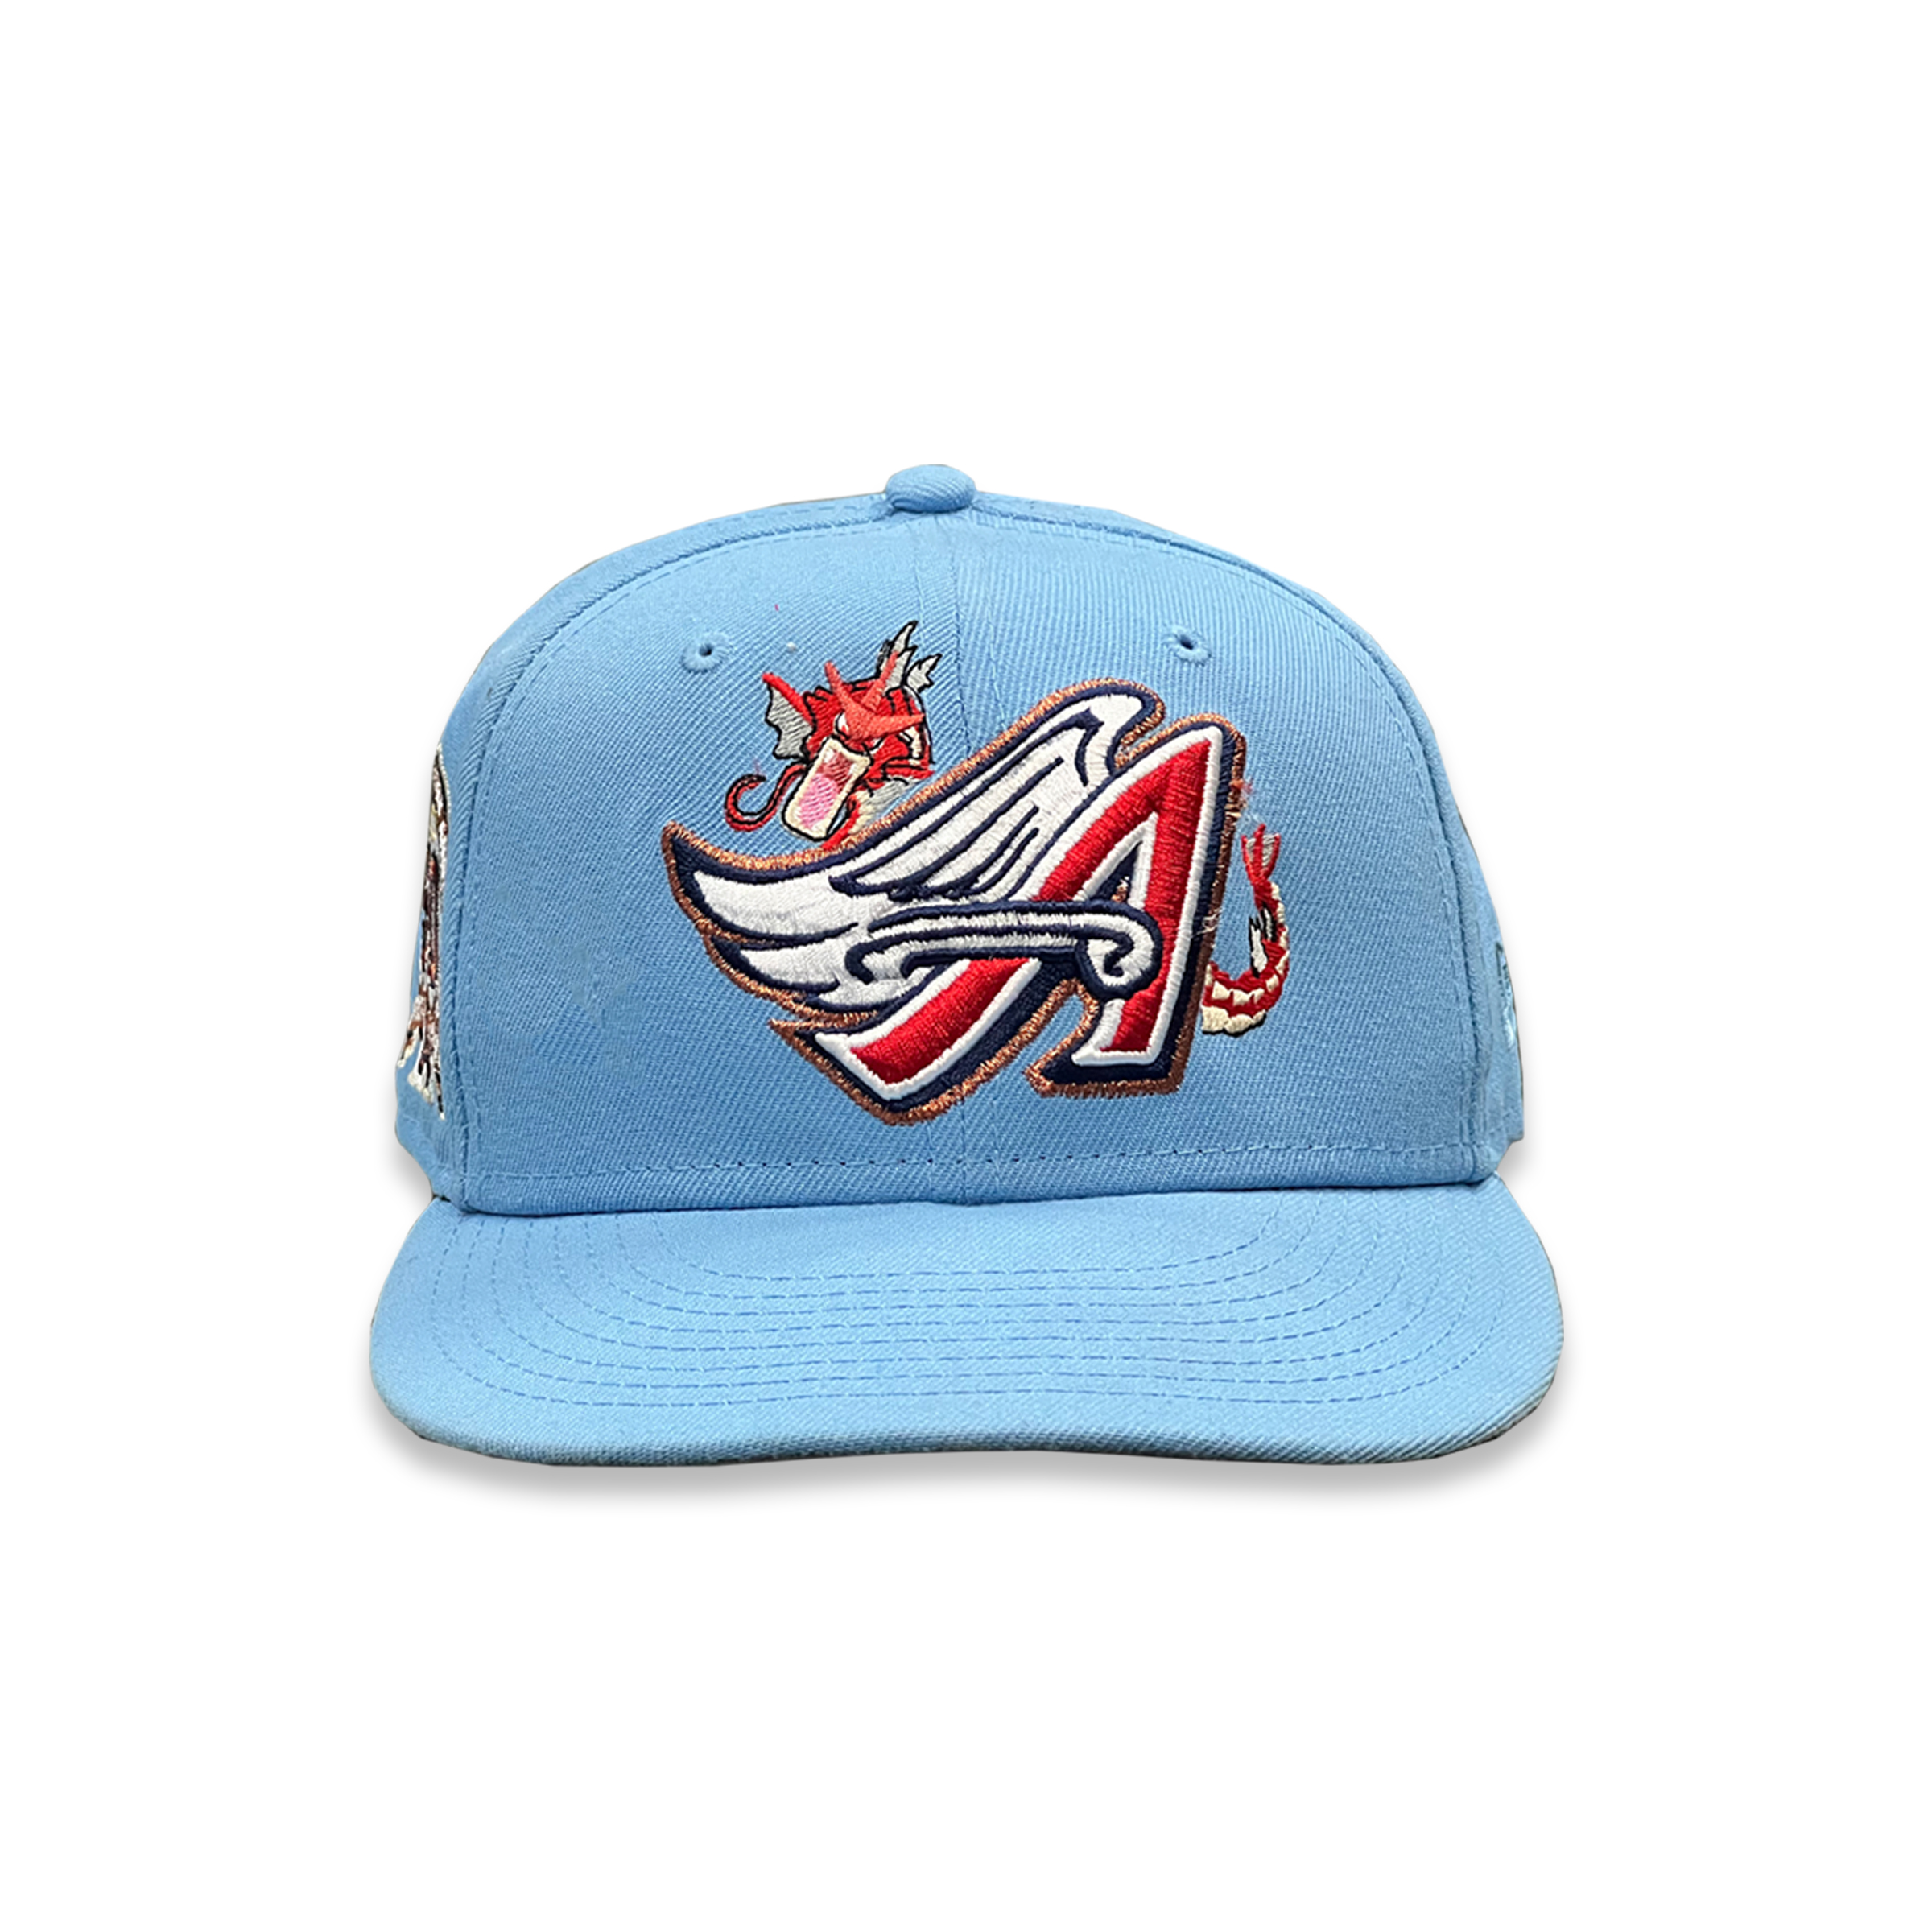 Demo World Shiny Sea Dragon Angels Fitted Hat Sky Blue/Grey - CN